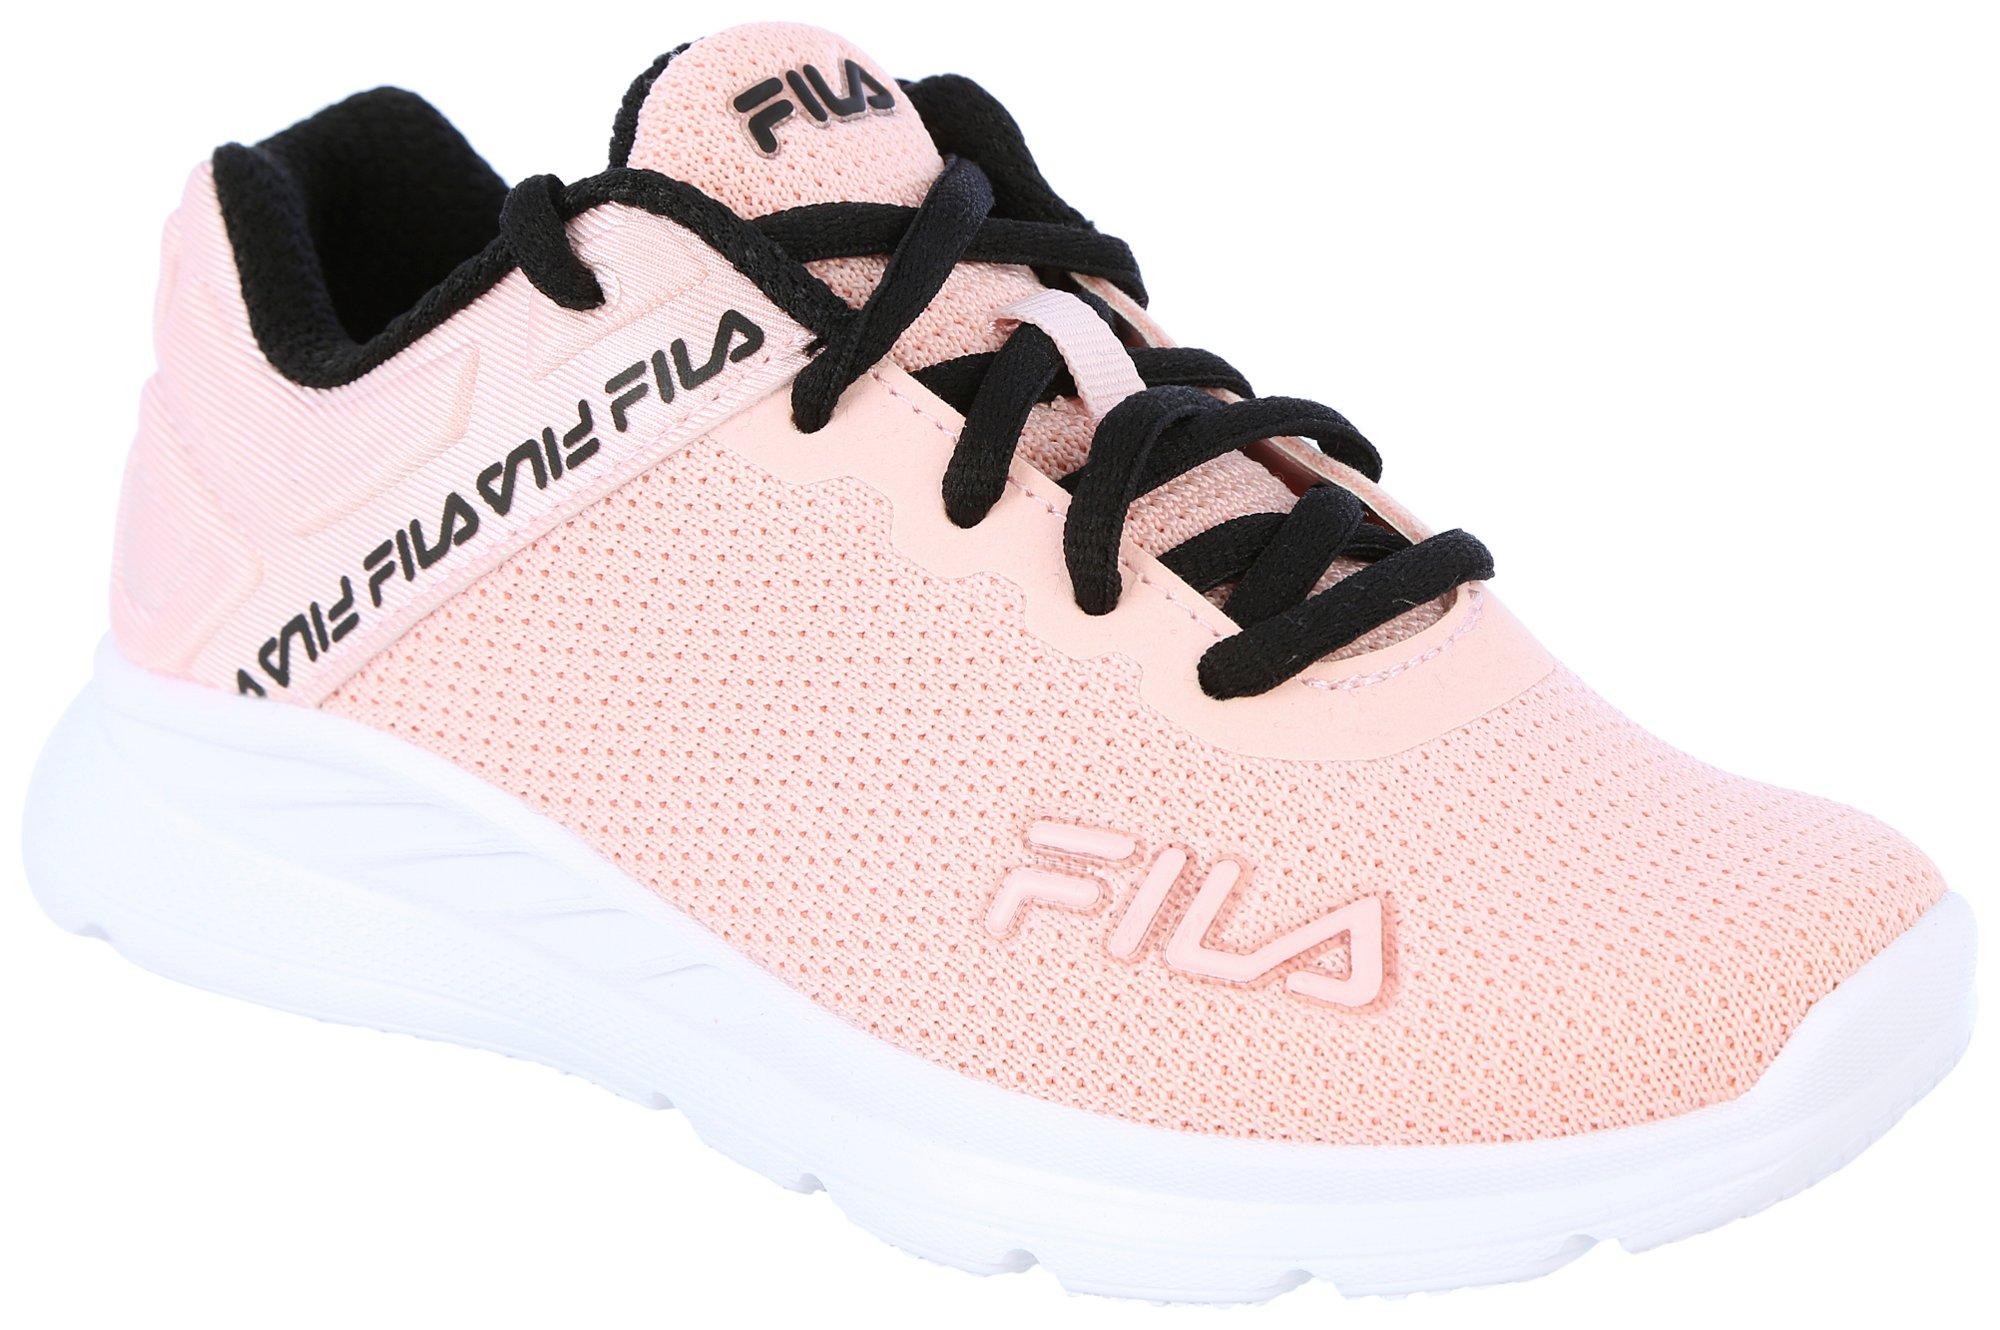 Girls Lightspin Athletic Shoes